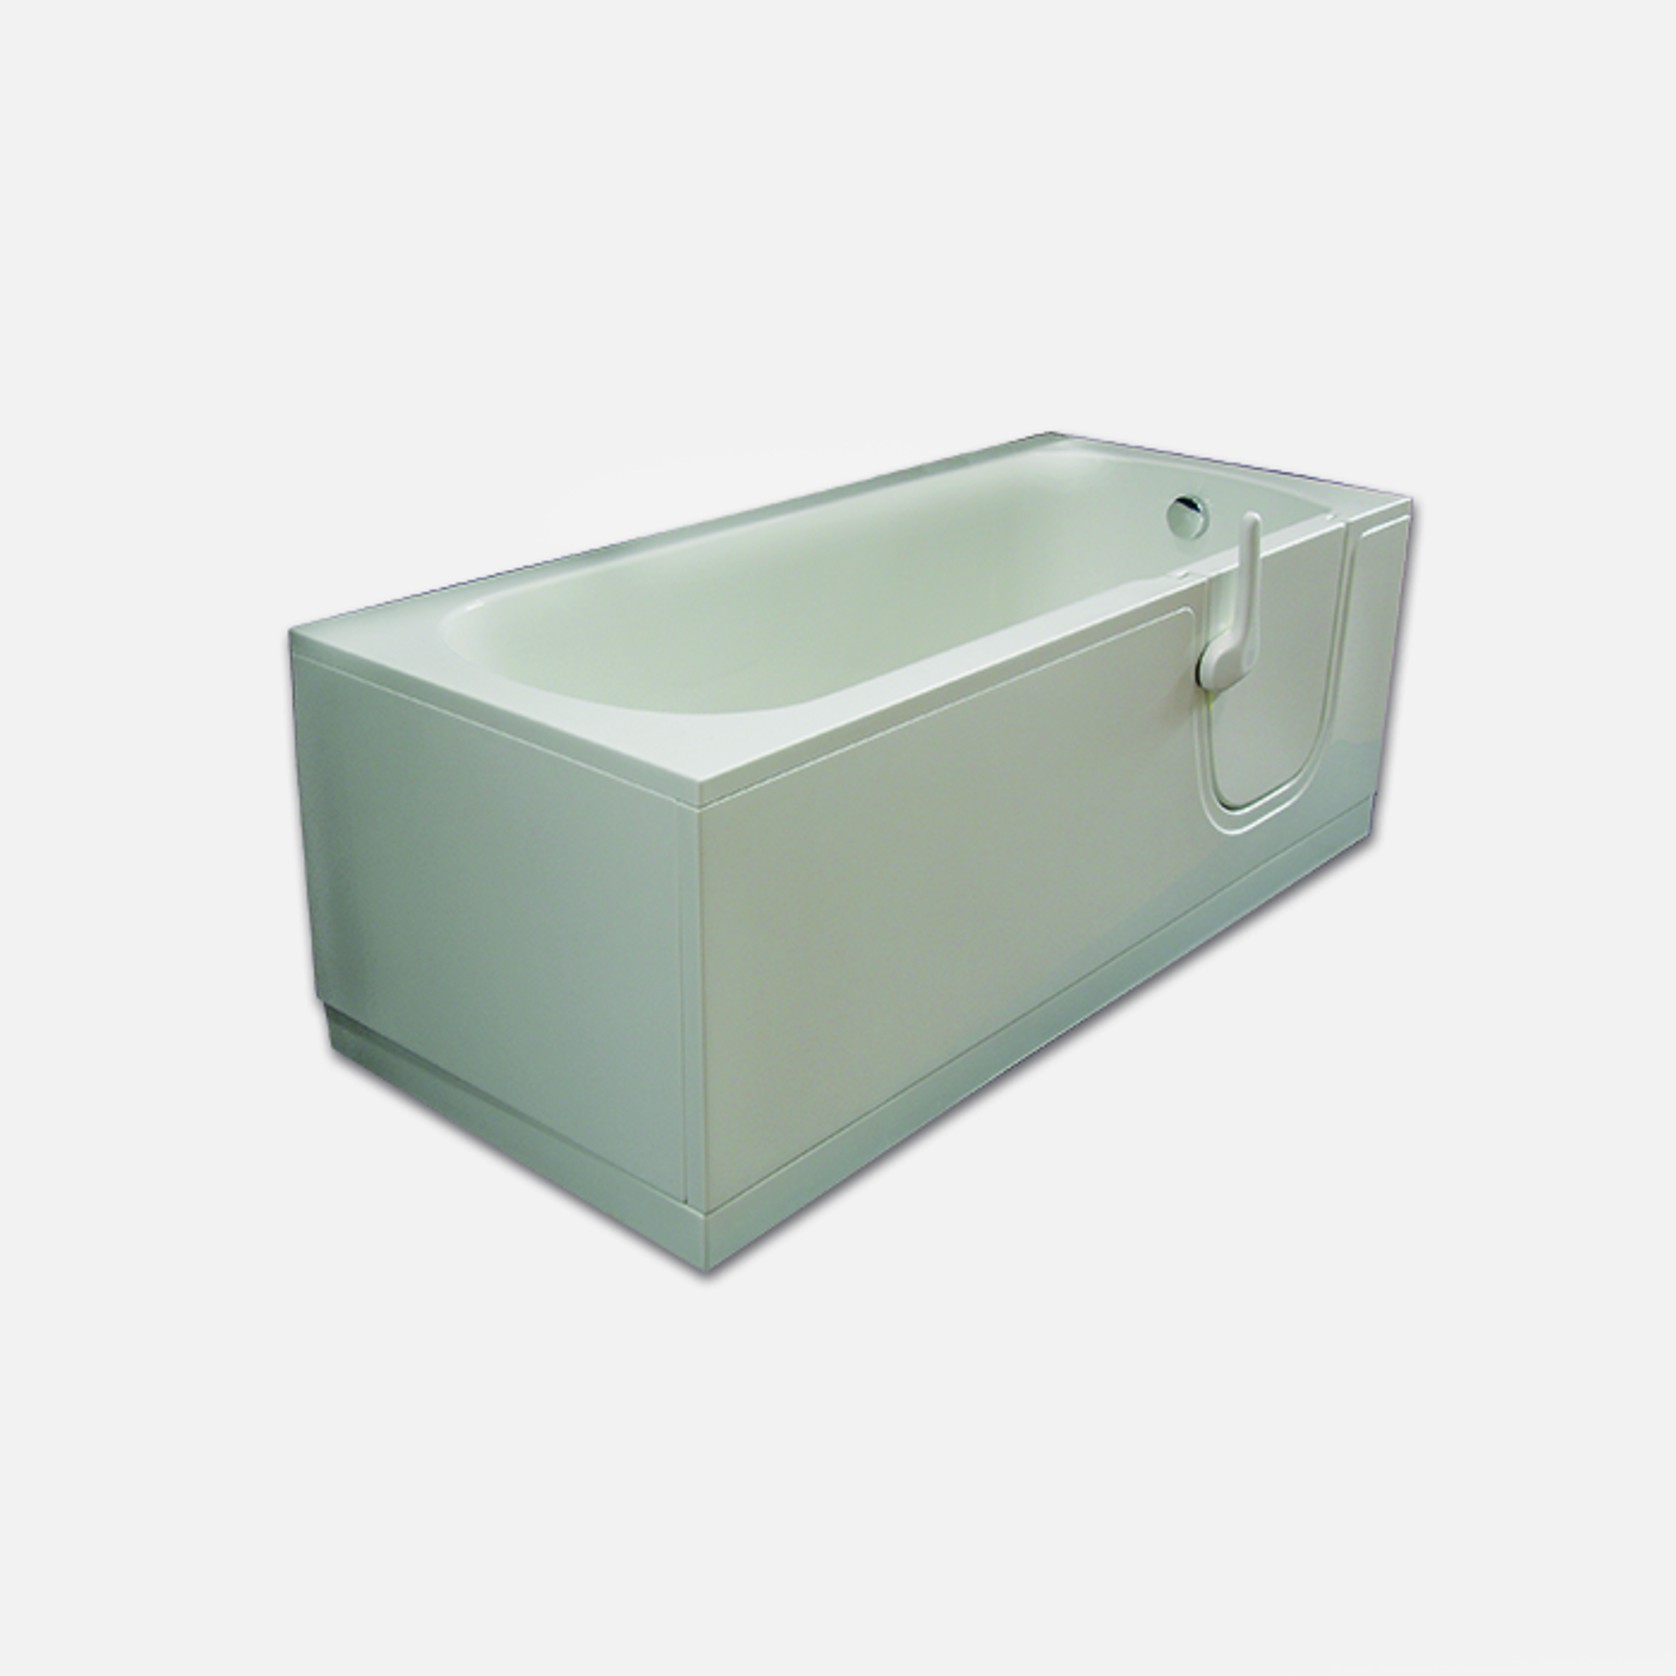 Oasi 170cm bathtub - door on the right by GOMAN gallery detail image